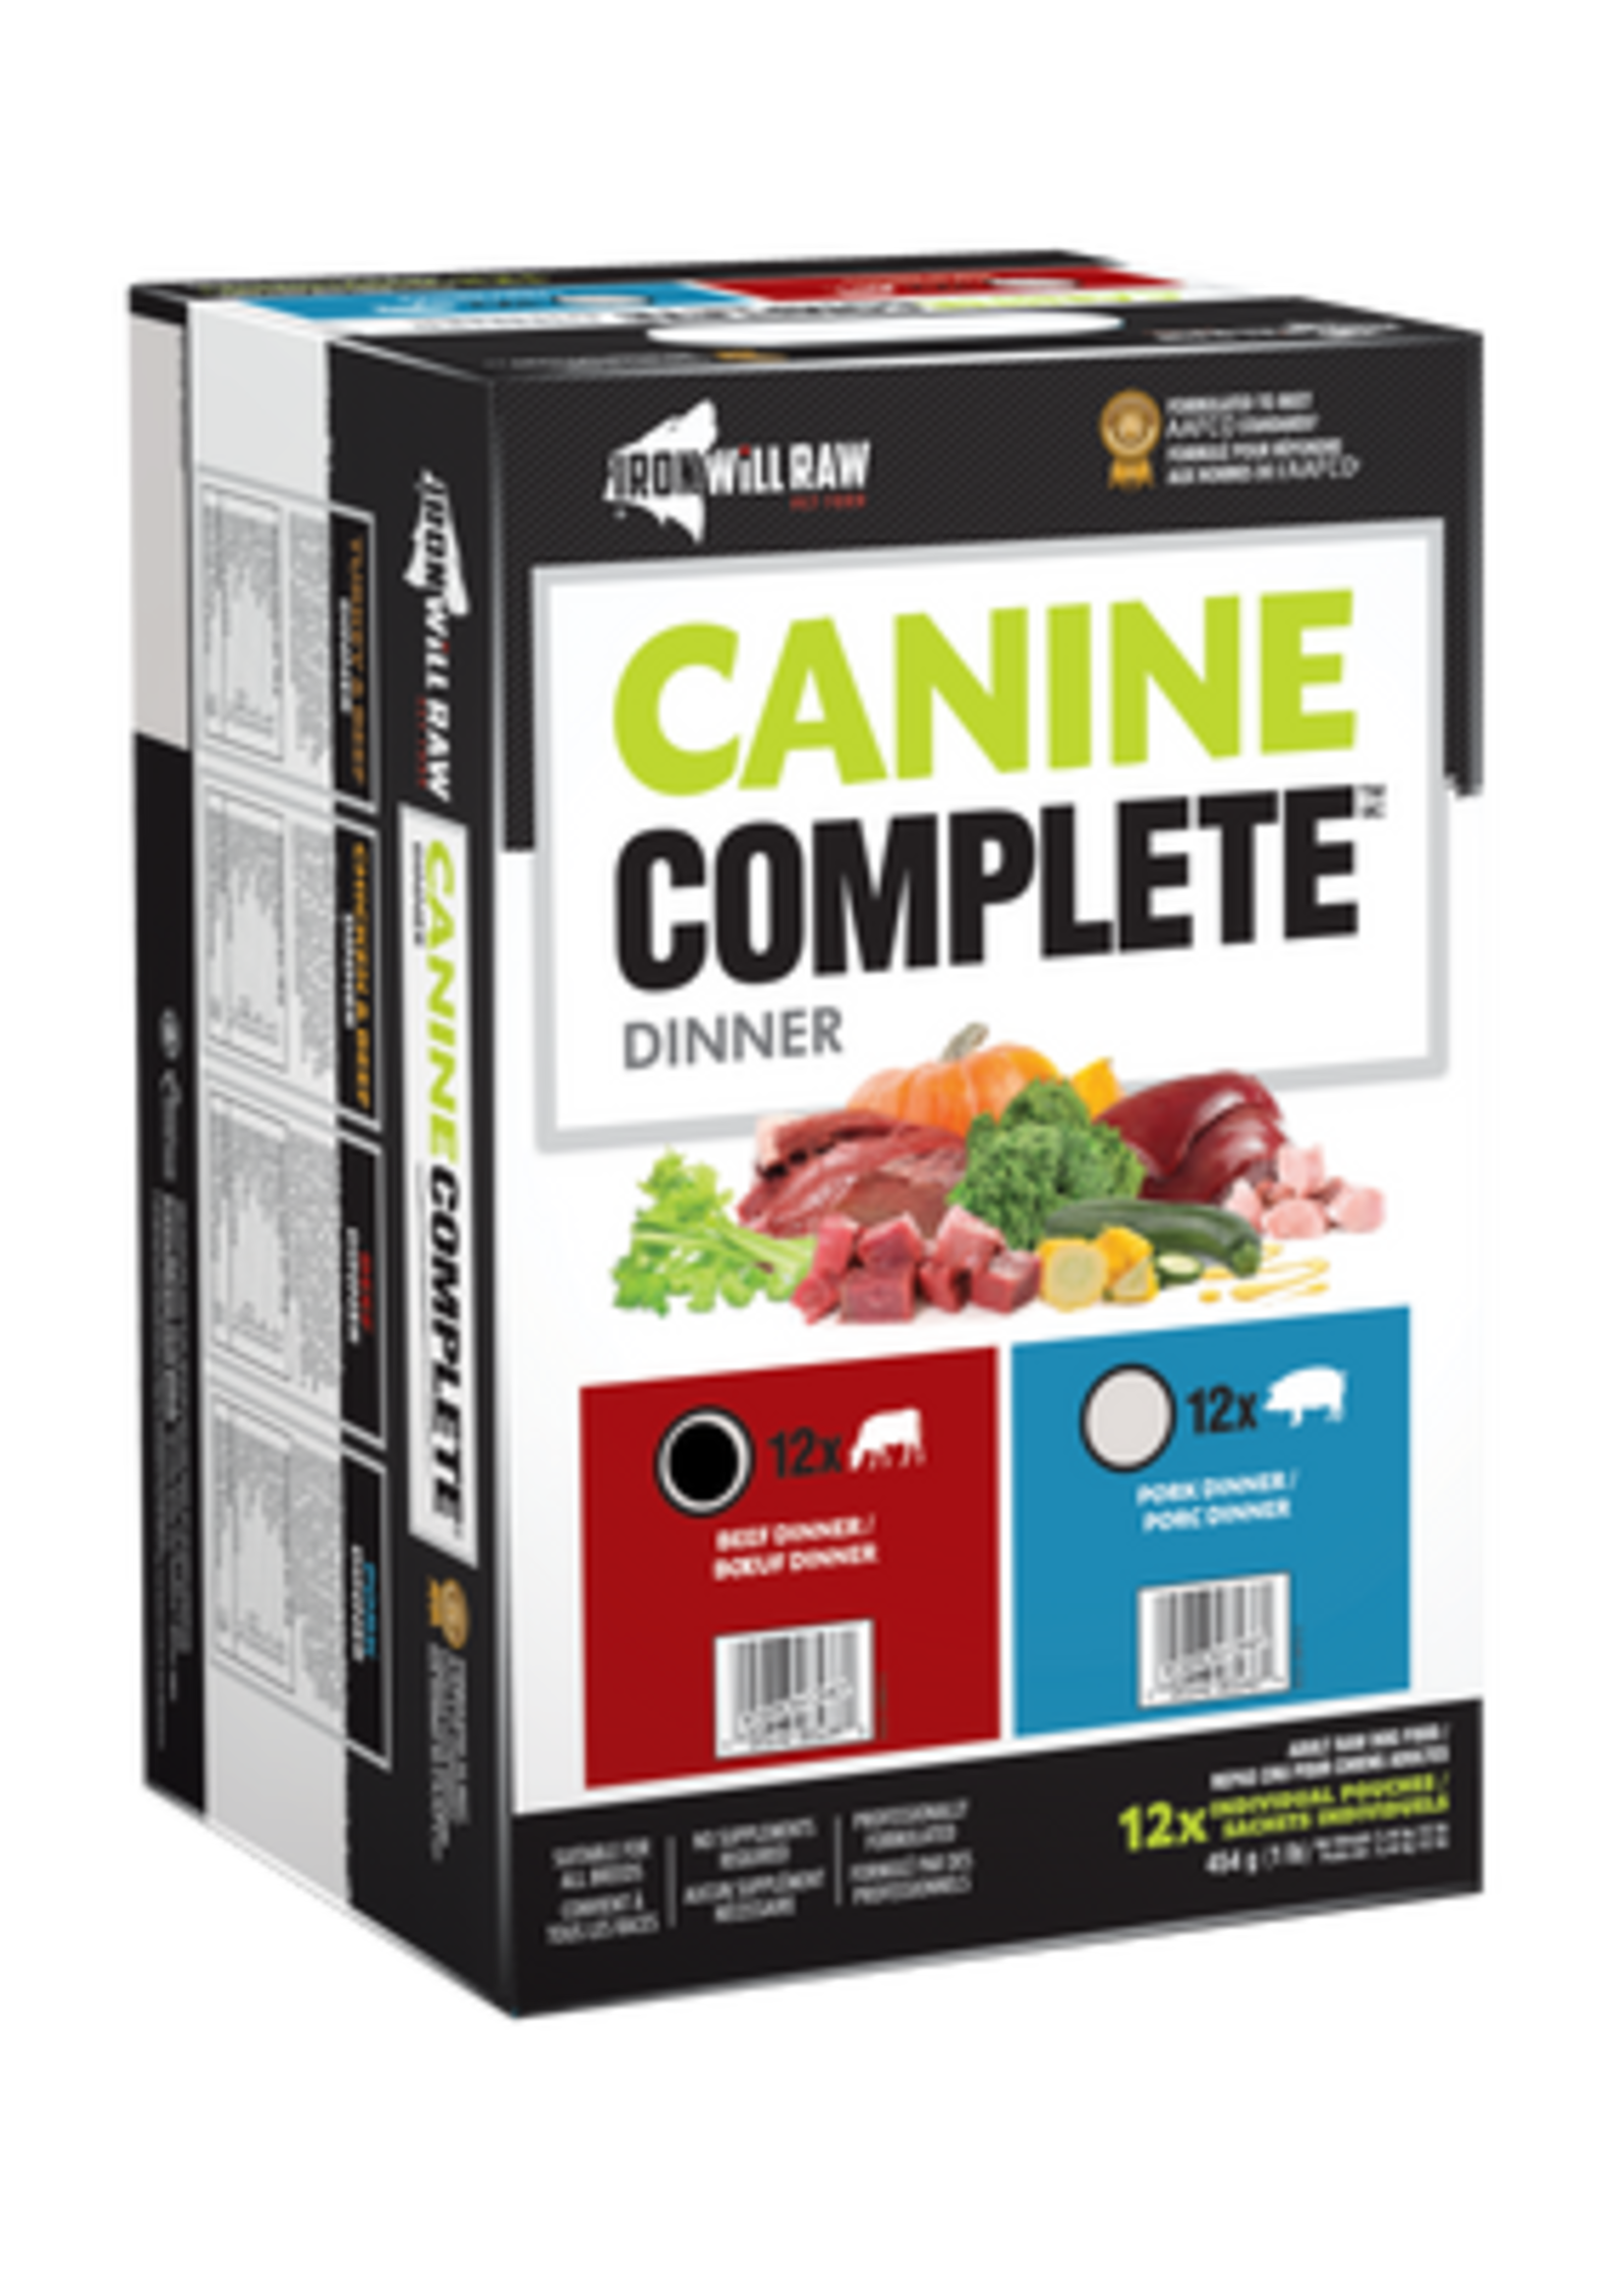 Iron Will Iron Will Raw Canine Complete Beef Dinner 1lb x 6